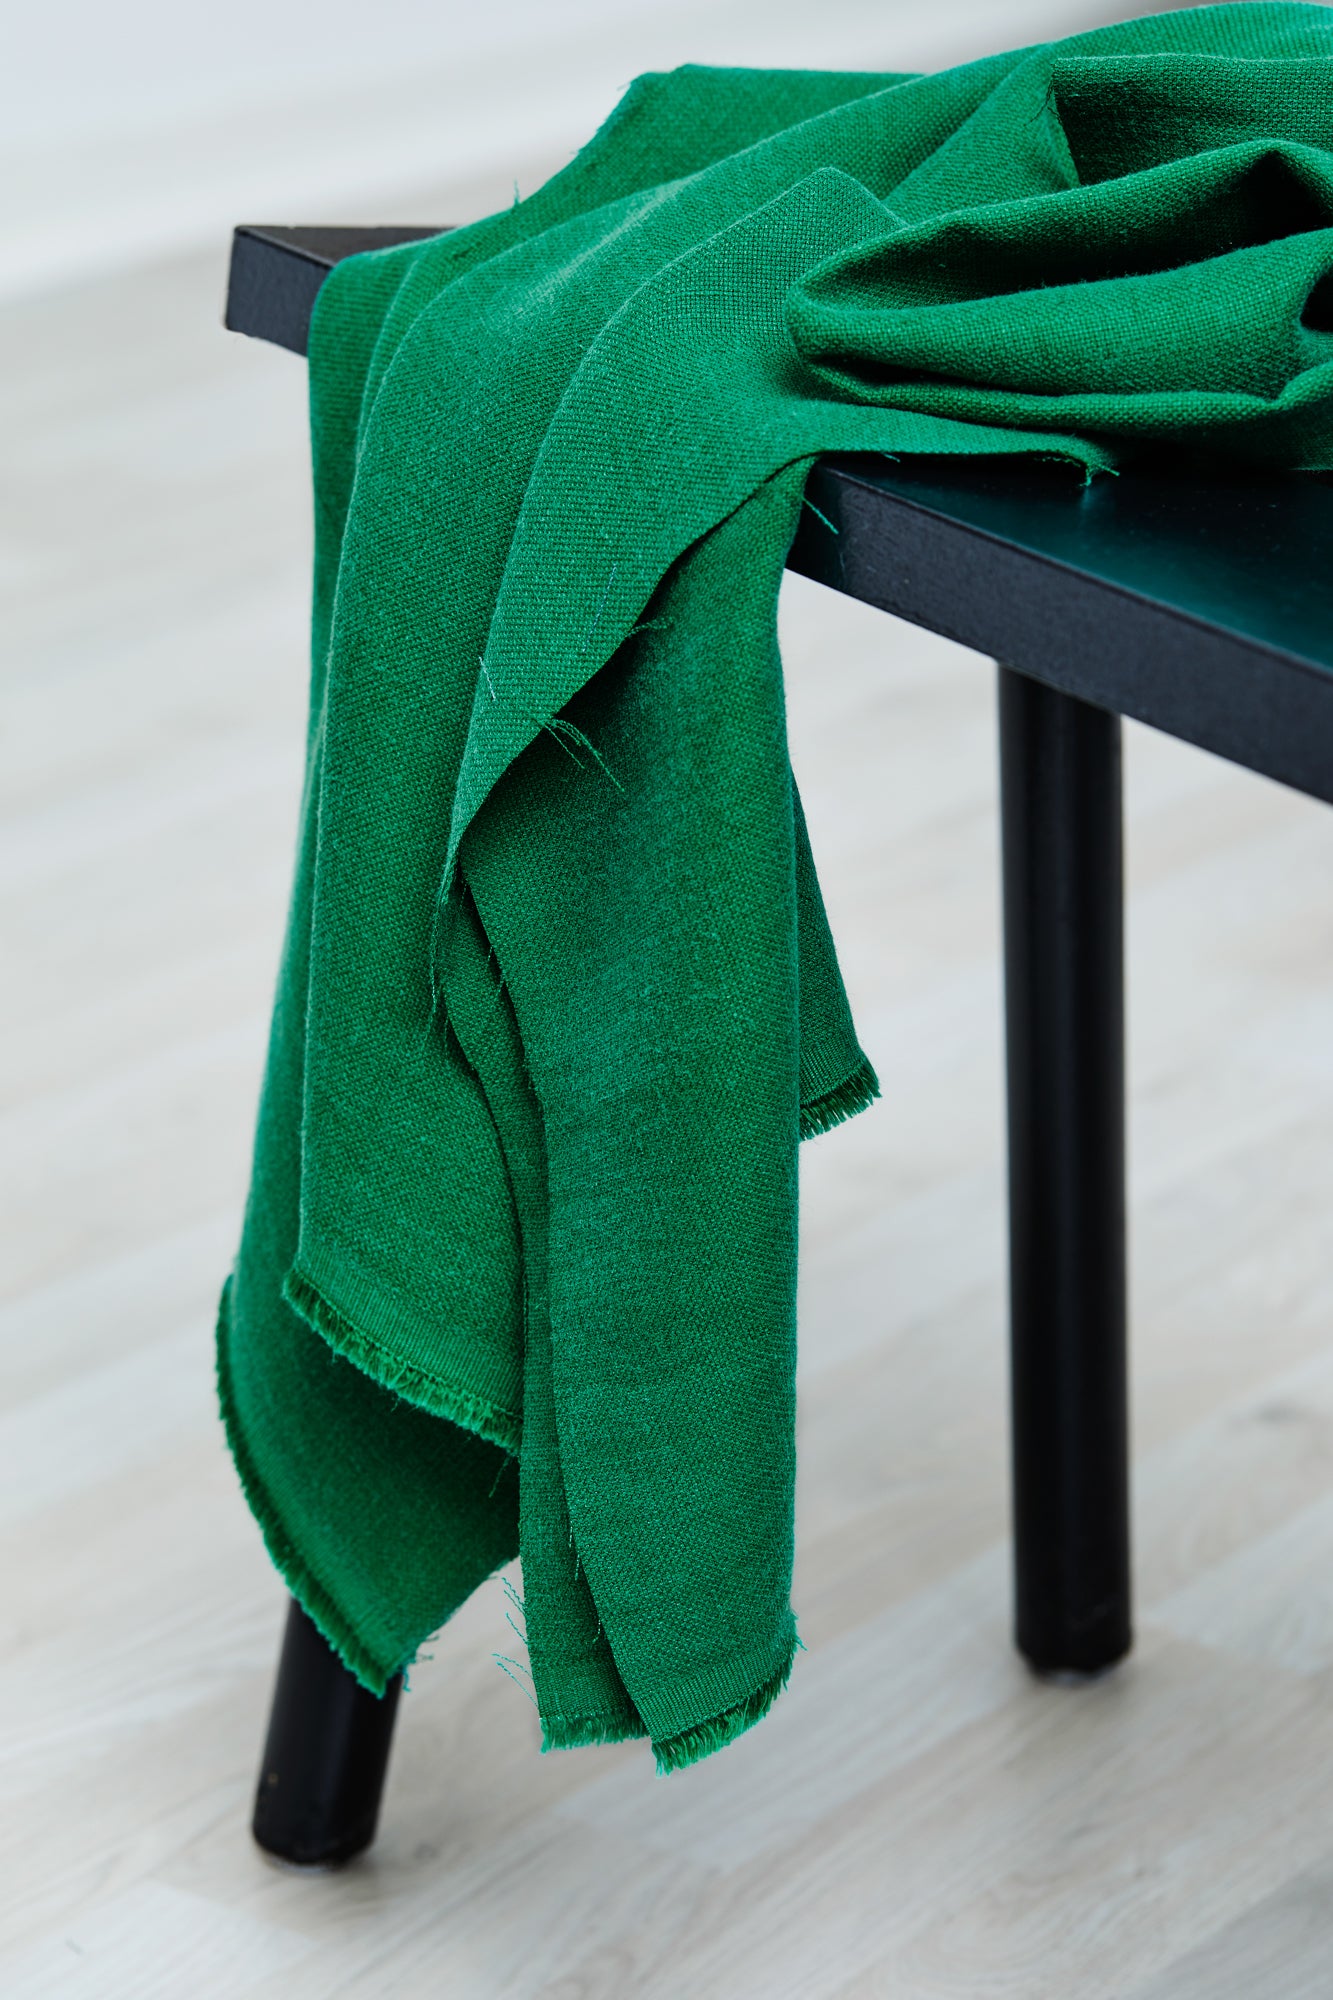 Mara linen blend tencel sewing fabric in colour frog green, draped over stool